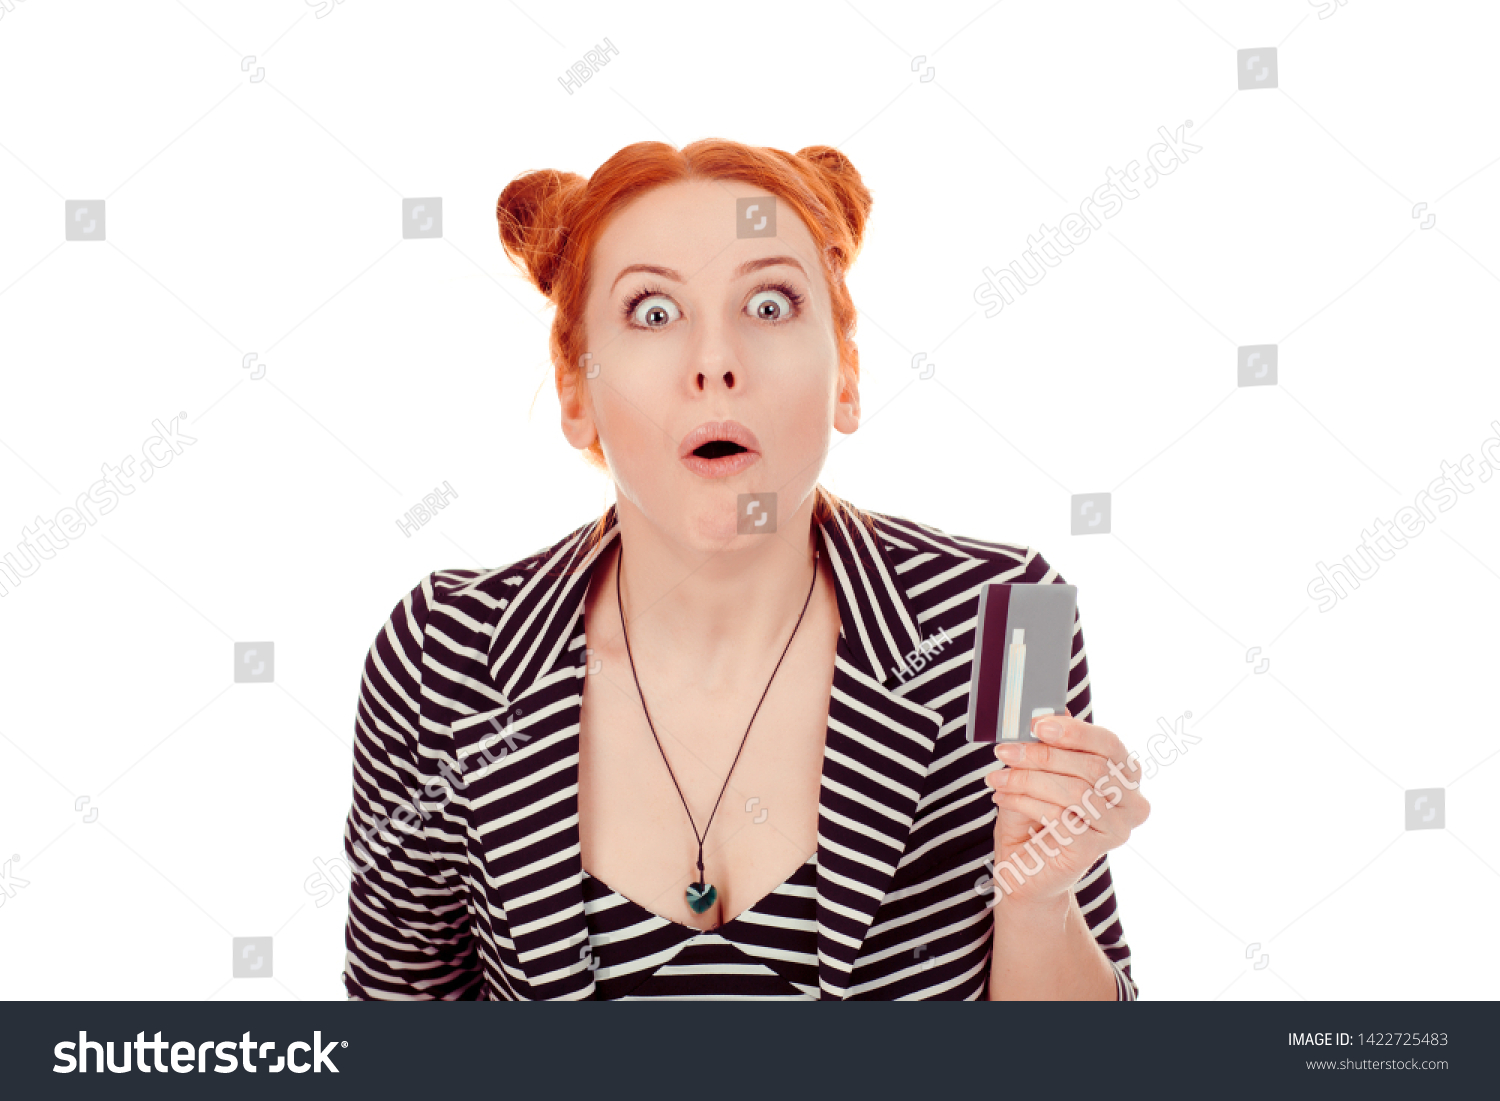 Banking shocking news. Closeup portrait of a beautiful woman shocked stunned young girl showing credit card wearing striped black white jacket with 2 buns up hairdo isolated on white background wall #1422725483